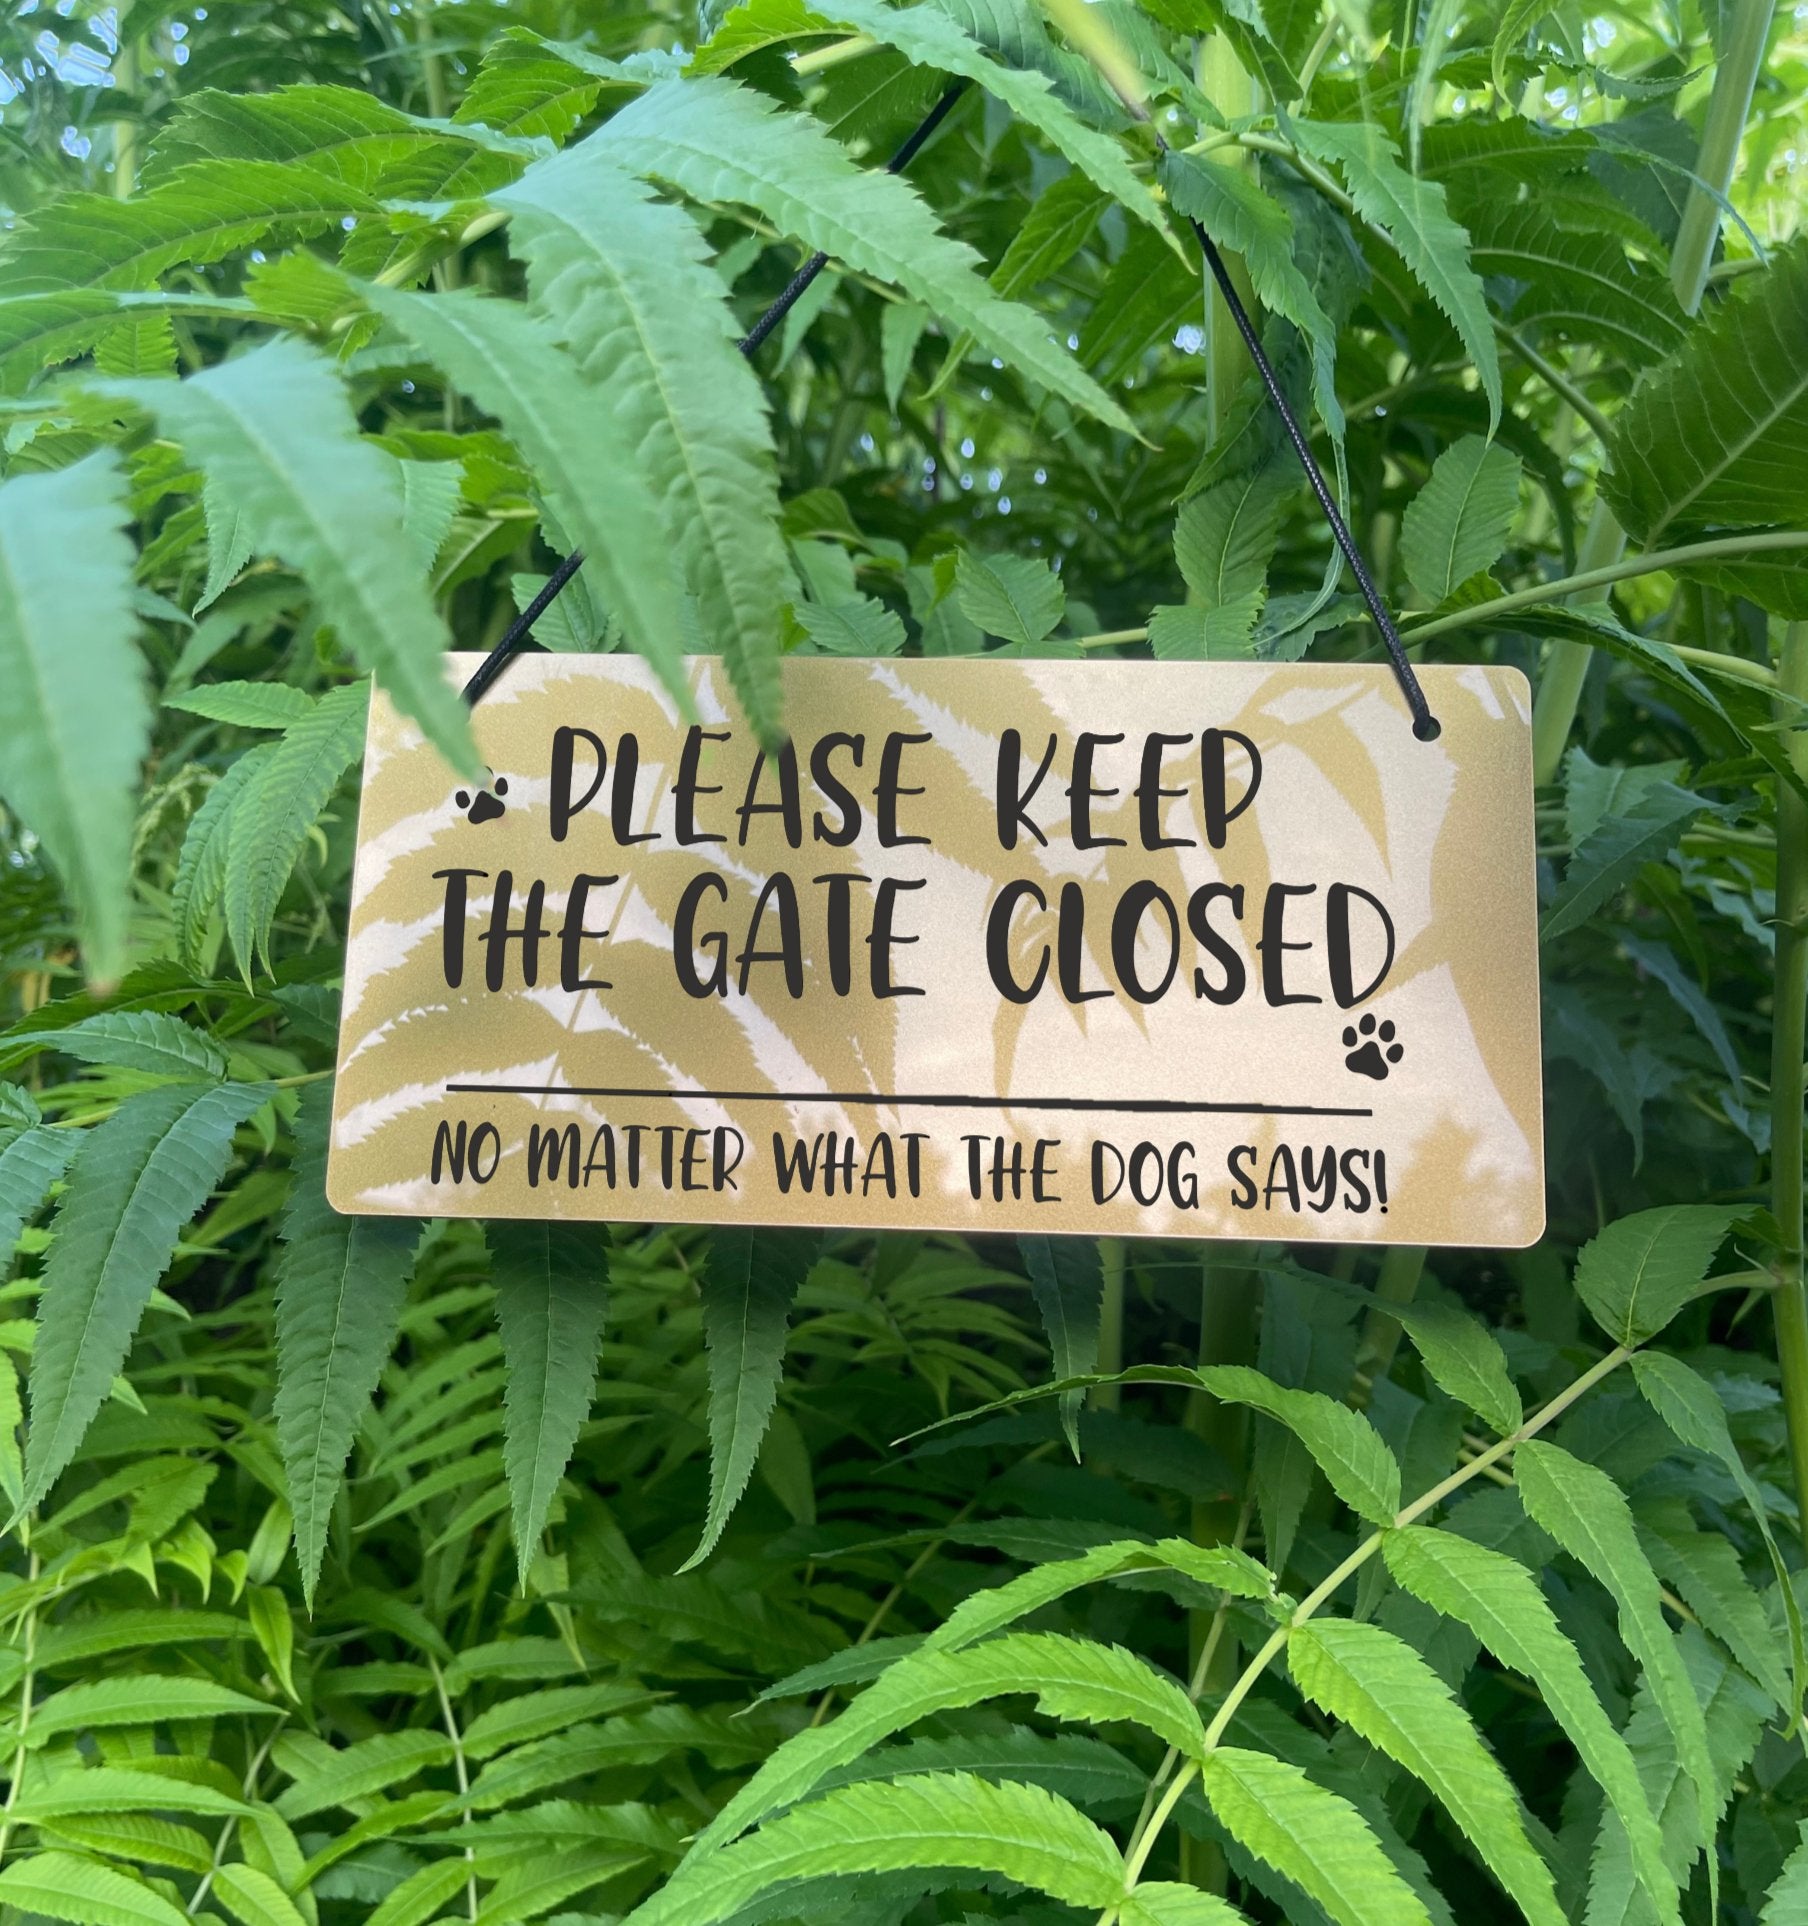  "Durable 3mm Thick Acrylic 'Please Keep the Gate Closed' Sign" Description: A sturdy sign made from 3mm thick acrylic material, laser-engraved with the message "Please Keep the Gate Closed, No Matter What the Dog Says." The sign is built to withstand wear and tear.